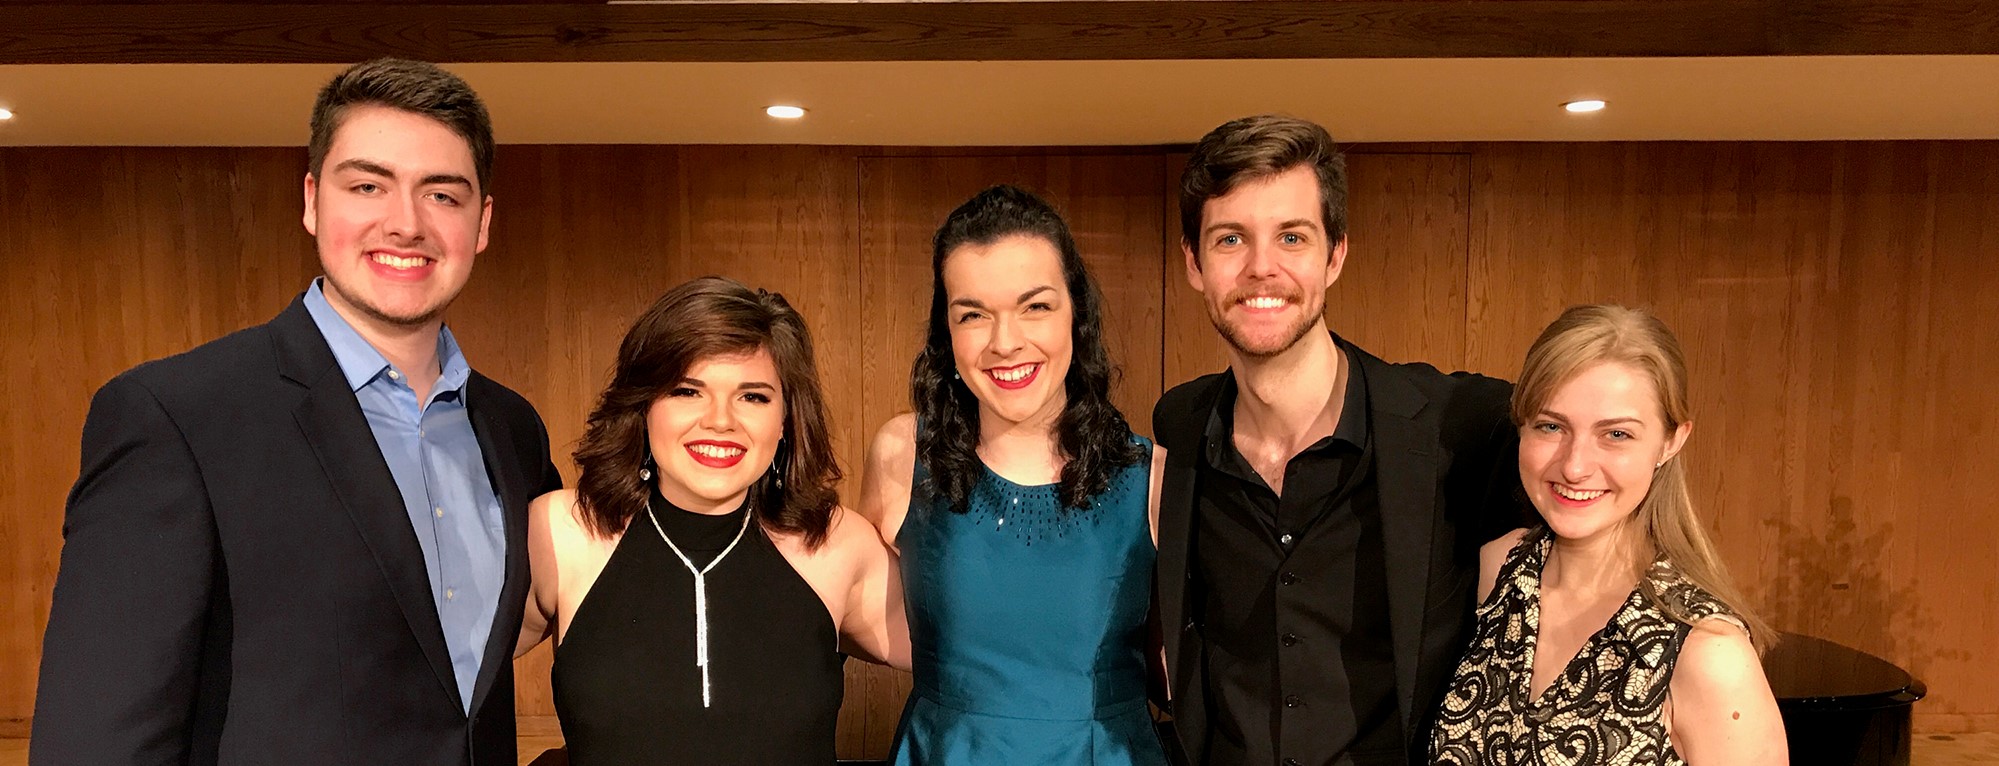 Clay Mobley (left), won first place in Ouachita’s 2018 Shambarger Competition for Singers. Other student winners included (from left): Lizzy Griffin, second place; Esther Atkinson, third place; Micah Brooks, fourth place; and Hannah Saunders, honorable mention.